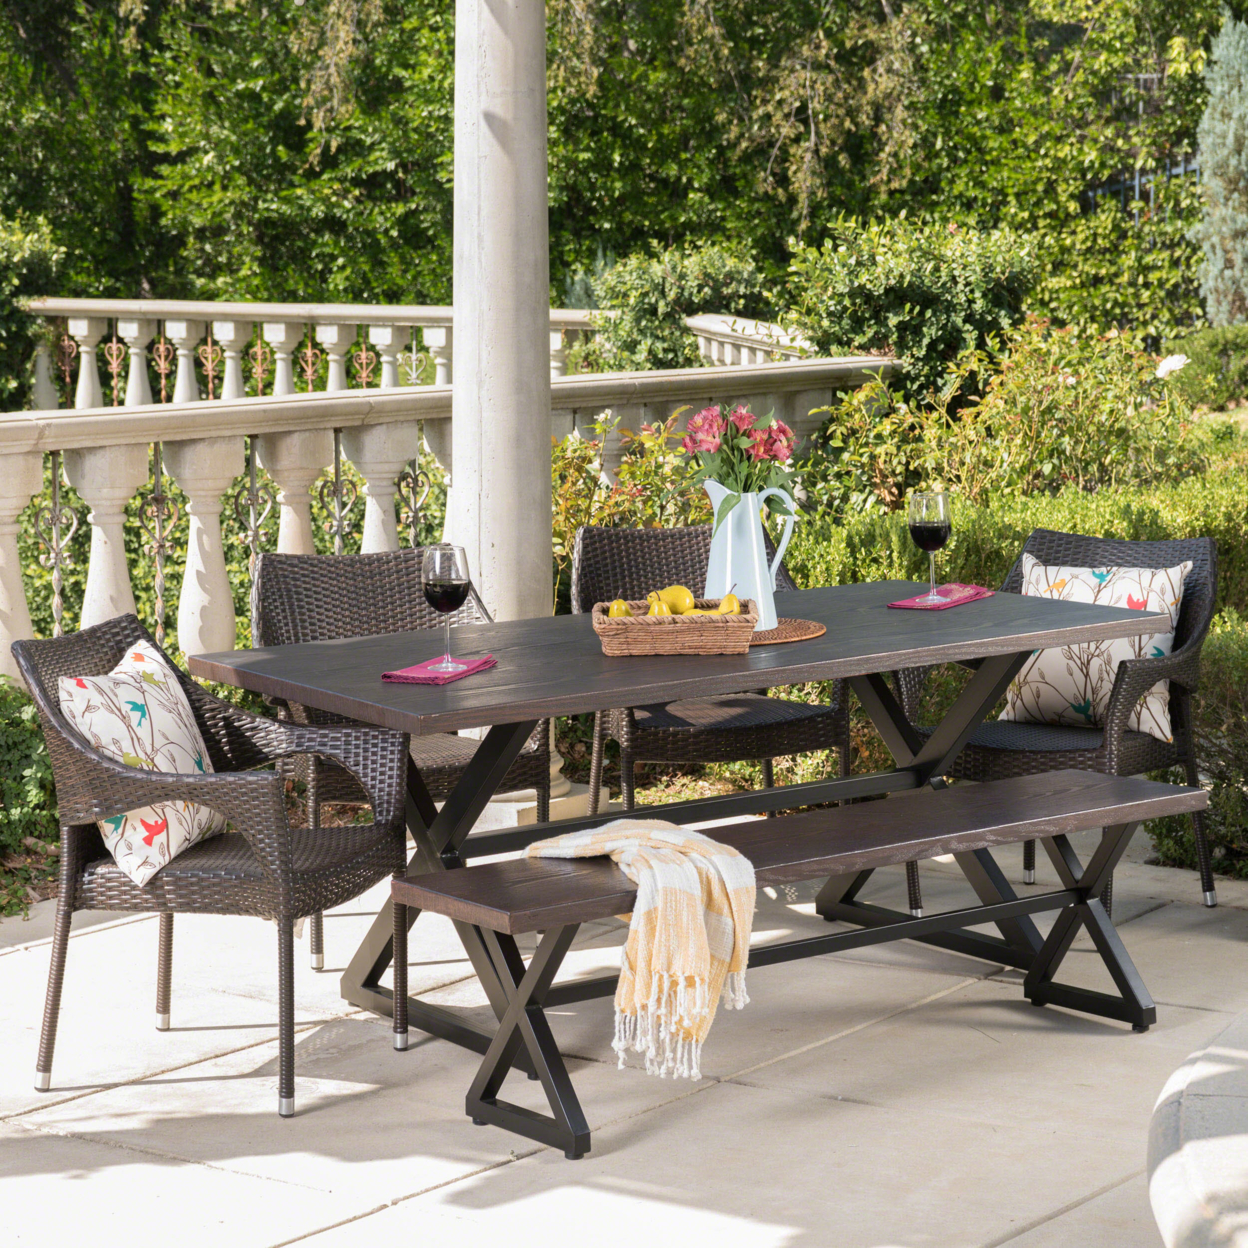 Ismus Outdoor 6 Piece Aluminum Dining Set With Bench And Stacking Chairs - Gray/Black